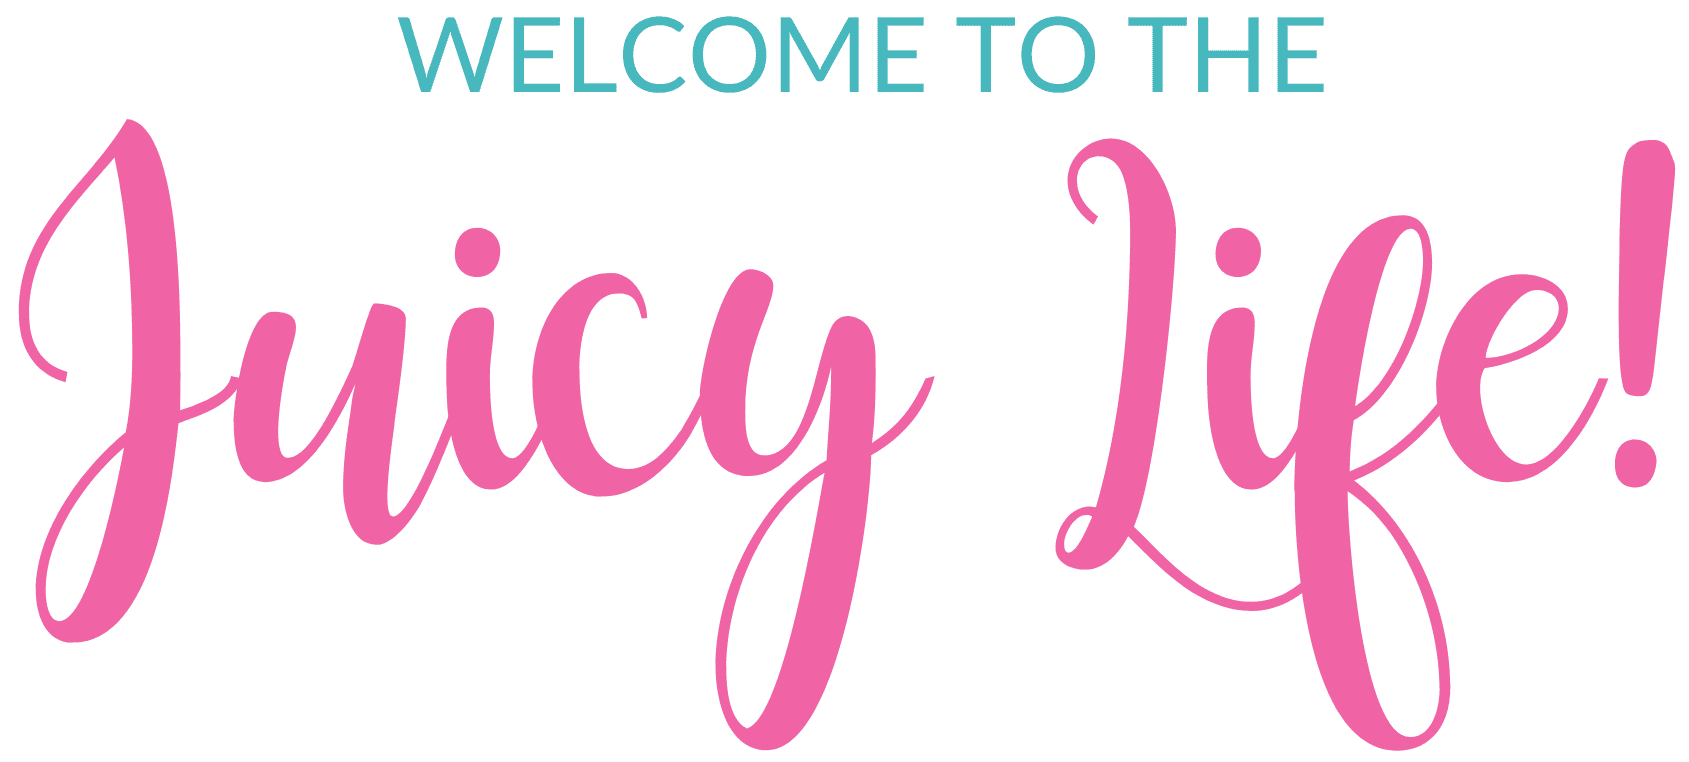 Welcome to the Juicy Life!